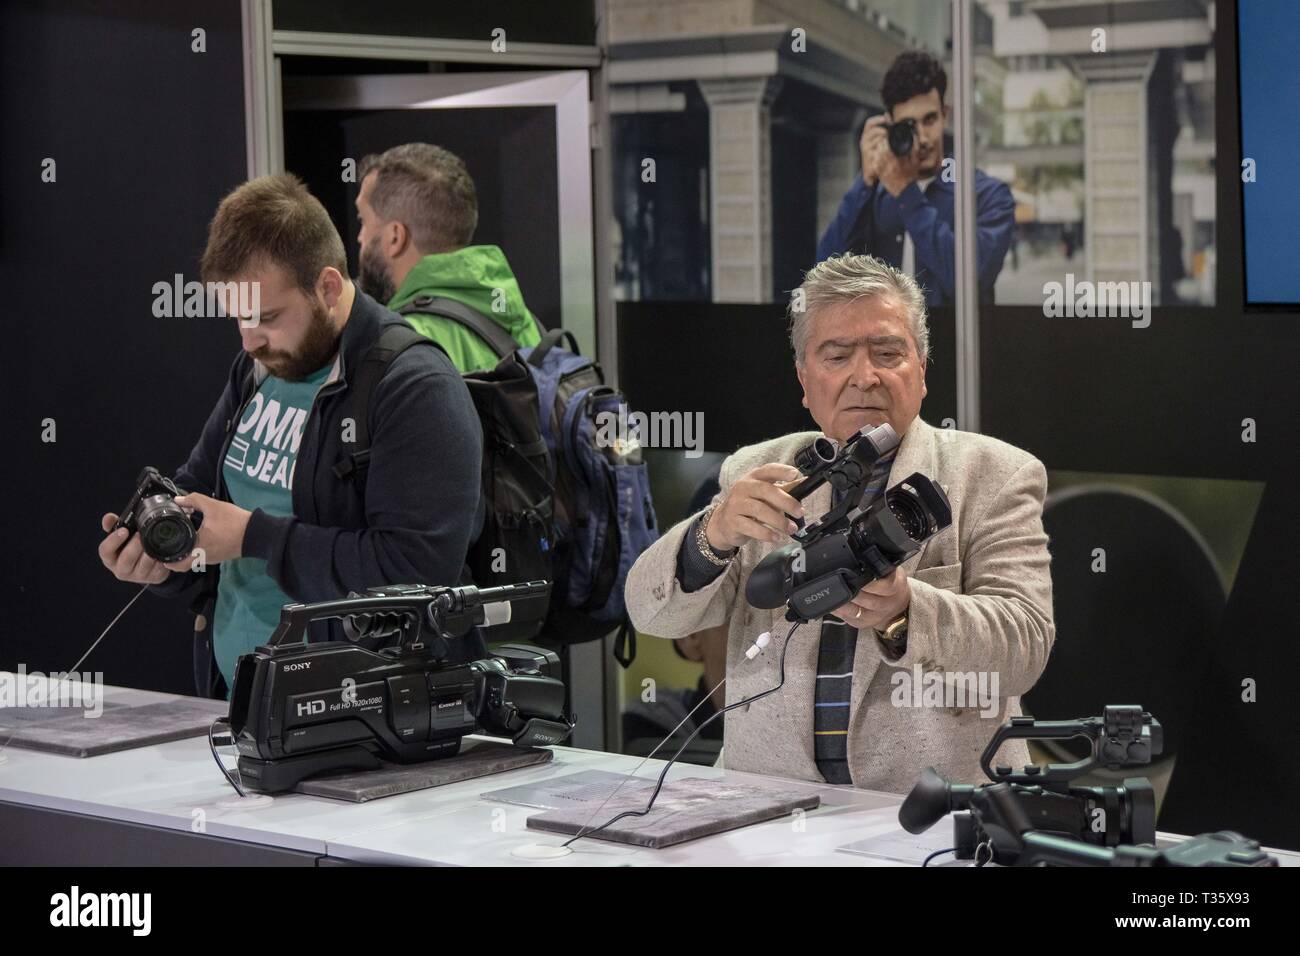 People are seen looking at the new cameras during the festival. Image +Tech & Photo vision 2019 is a big festival with large corporate delegations, many exhibitions, stores and workshops about photography and video was held In the place of Helexpo Marousi in Athens, Greece. Stock Photo